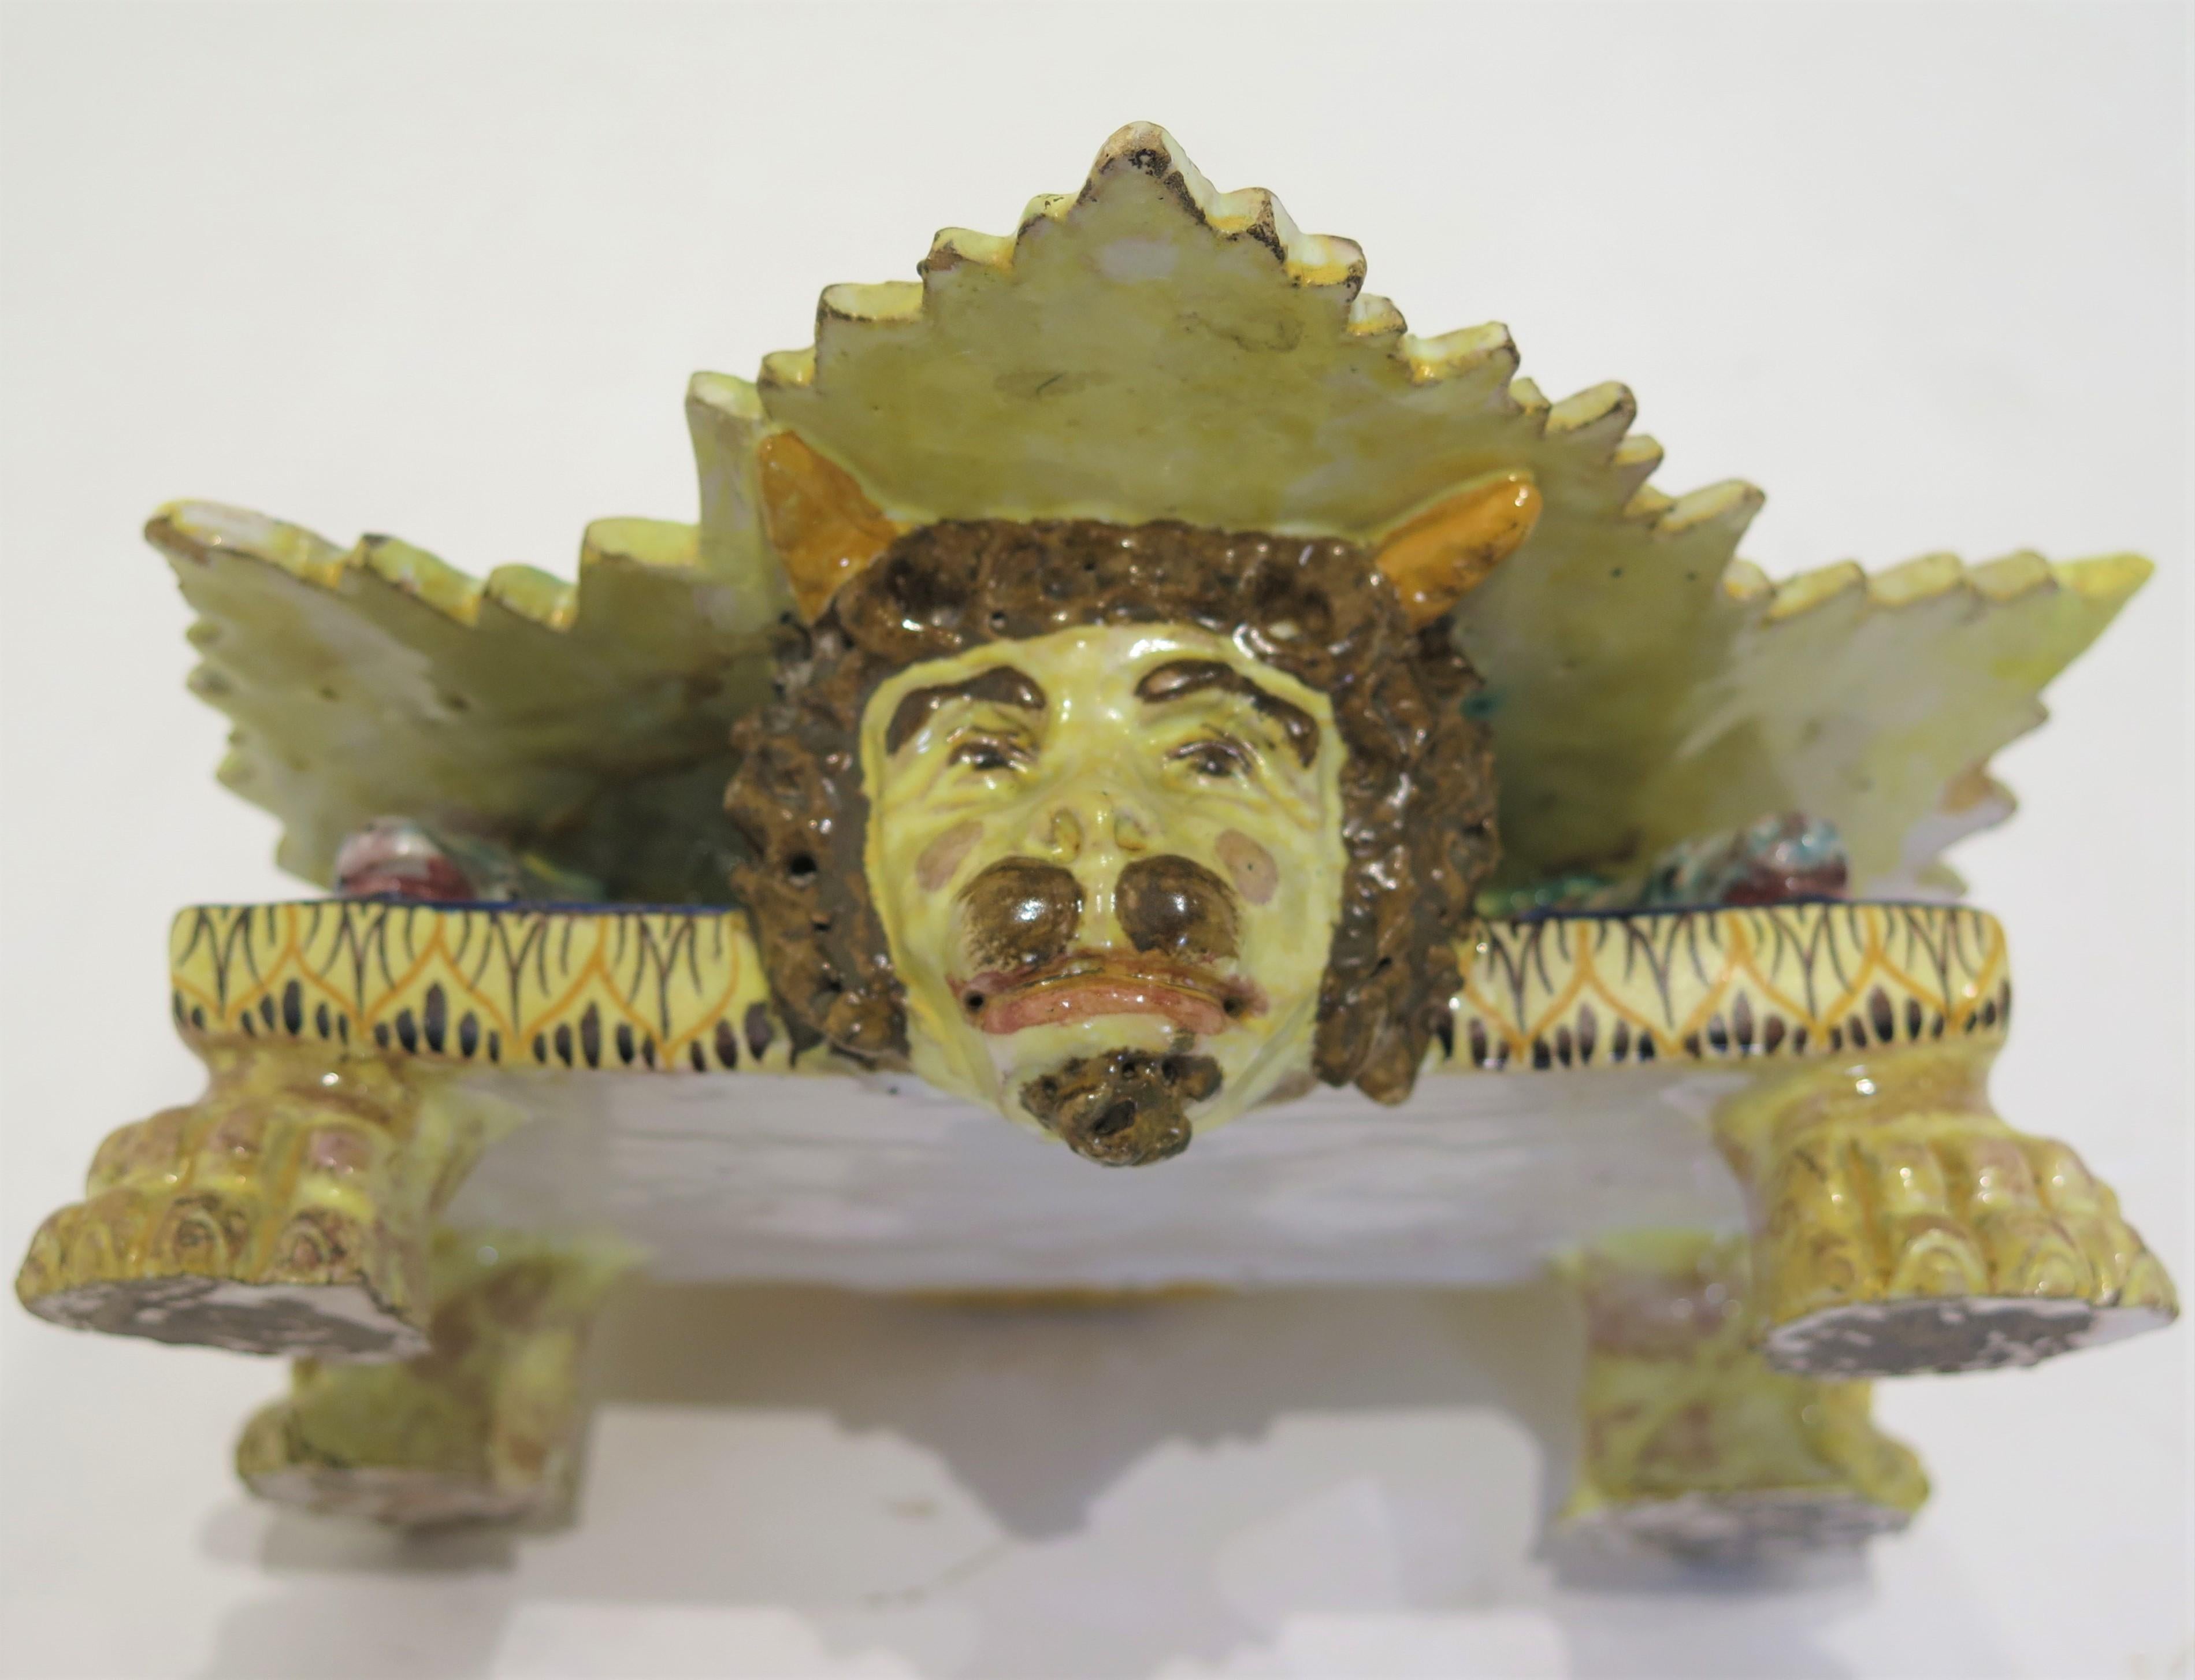 Italian majolica Palissy type pottery inkstand in the form of a leaf with fruit, burds and lizard on animal paw feet. Provenance